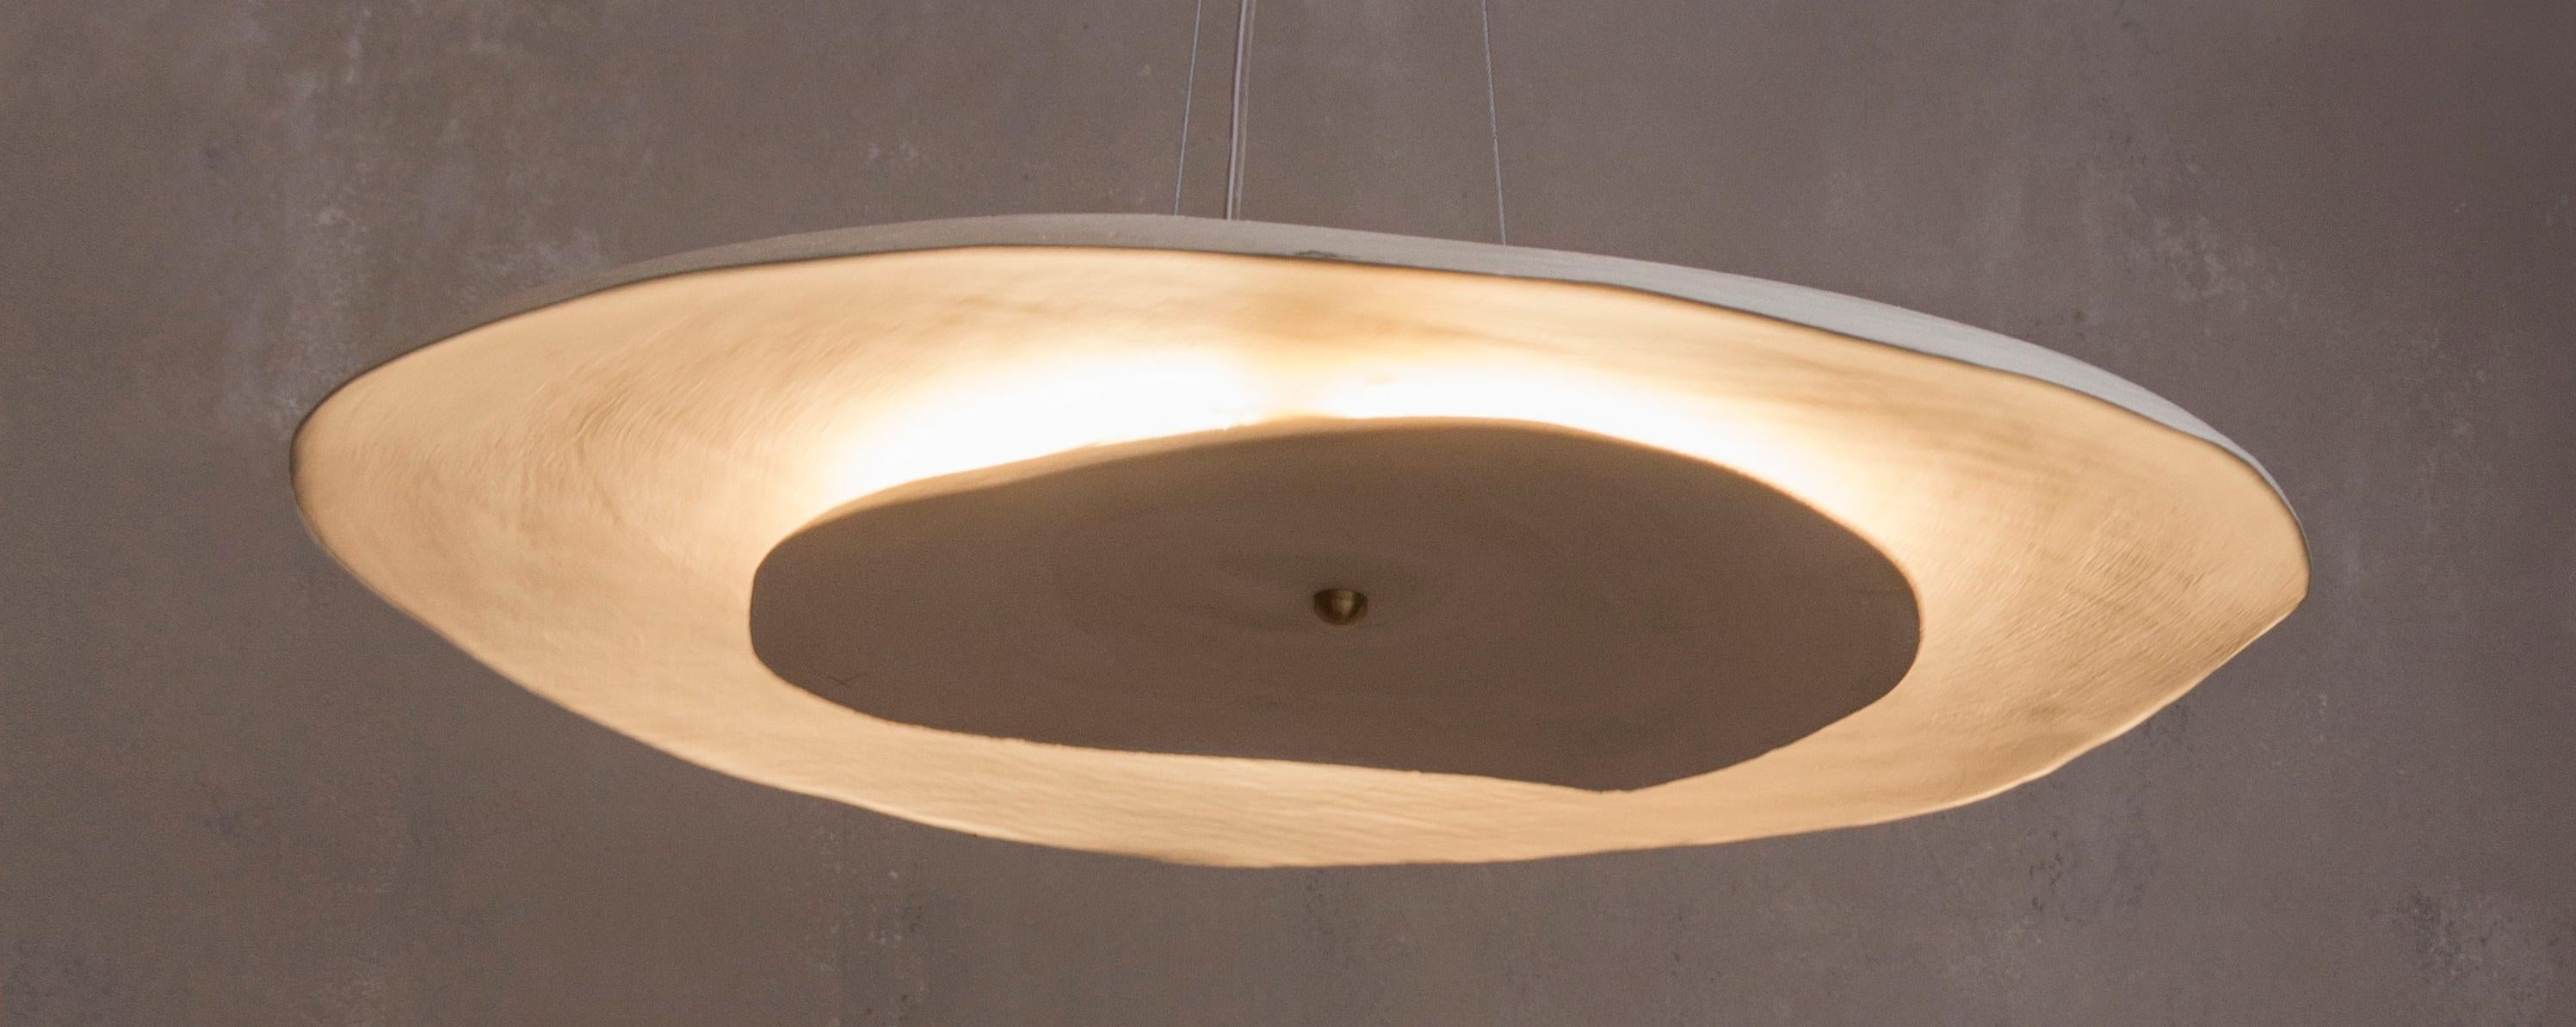 French Shadow #2 Pendant Light by Margaux Leycuras For Sale